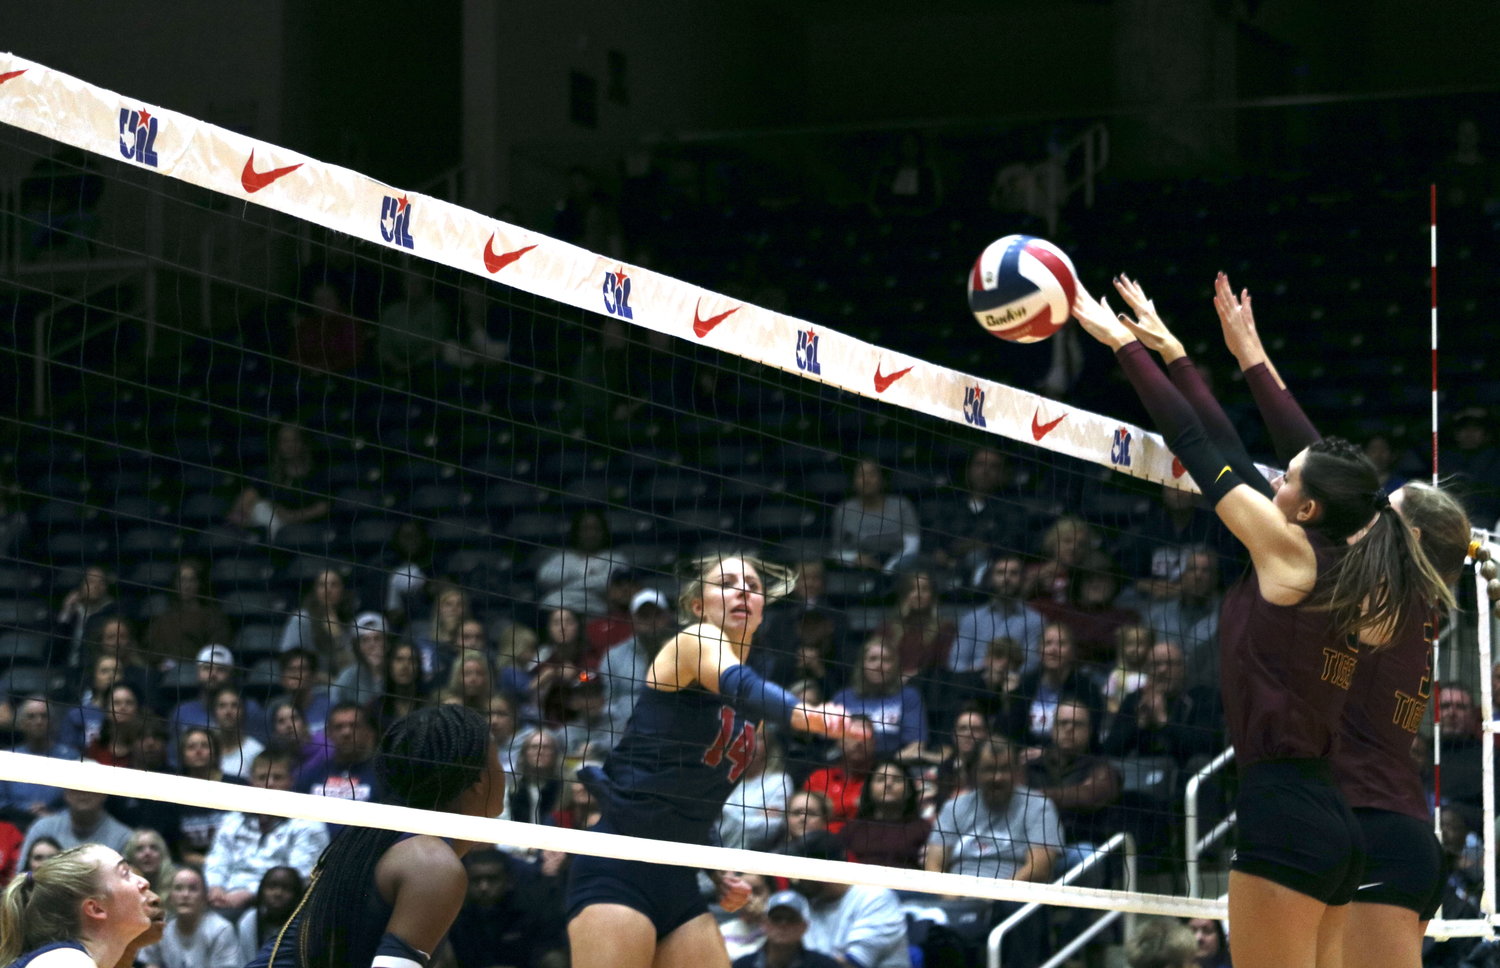 Skylar Skrabanek attempts a kill during Saturday's state final between Tompkins and Dripping Springs at the Curtis Culwell Center in Garland.